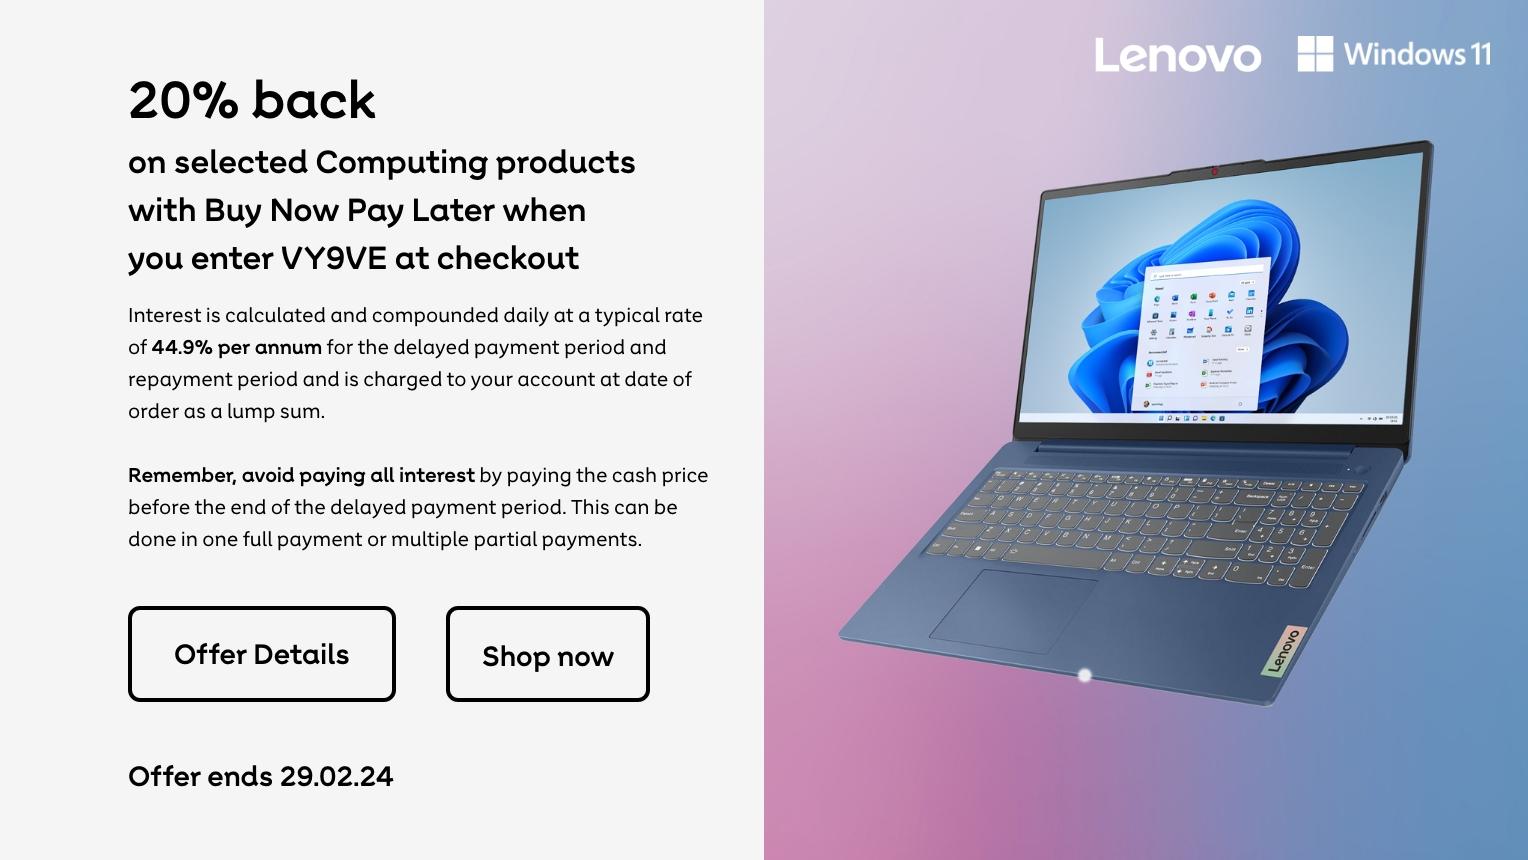 20% back on selected Computing products with Buy Now Pay Later when you enter VY9VE at checkout. Offer Ends 29.02.24